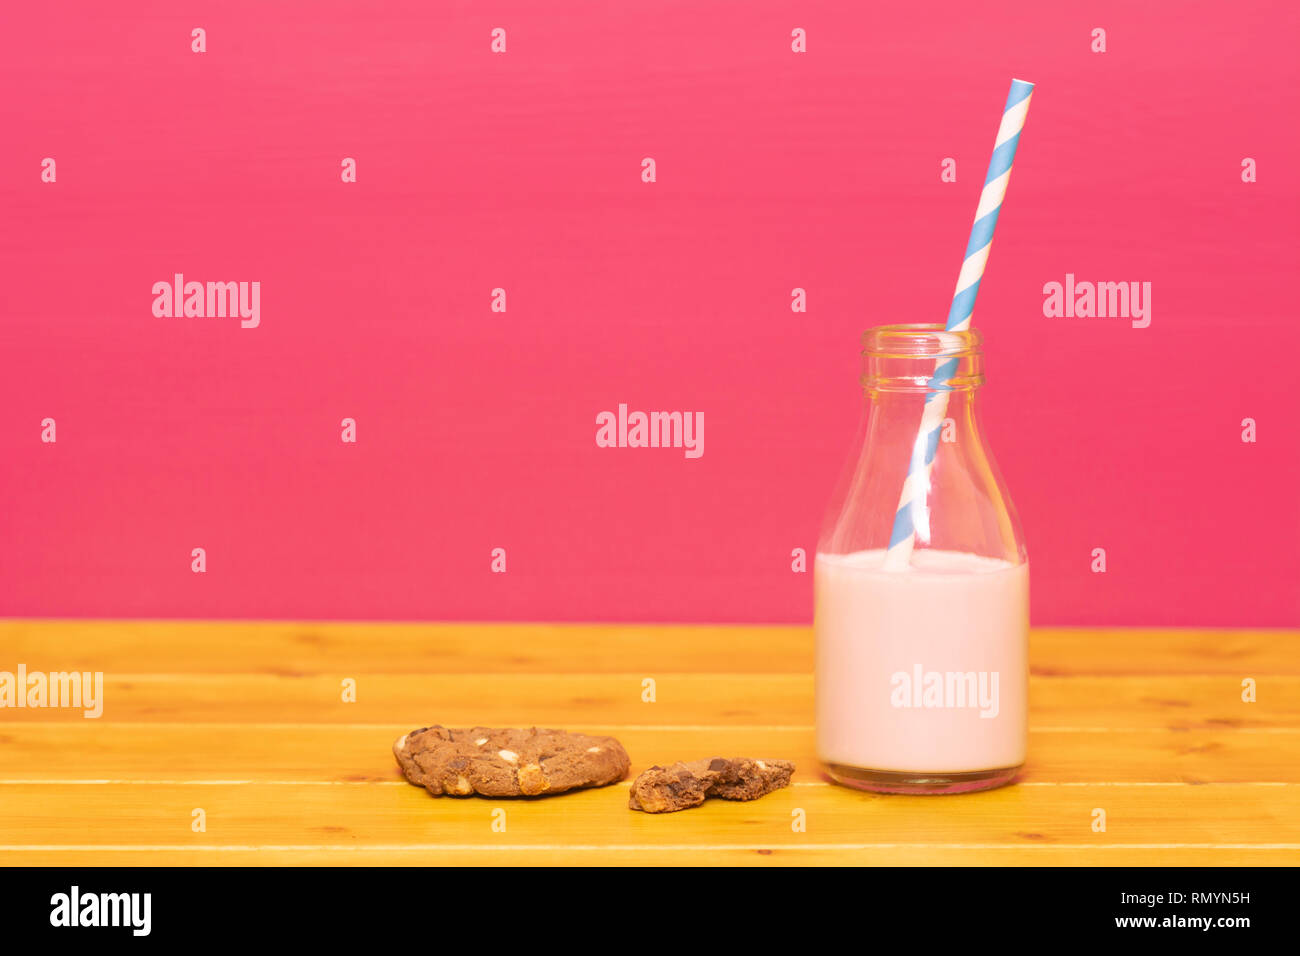 One-third pint glass milk bottle half full with strawberry milkshake with a retro straw and a half-eaten chocolate chip cookie, on a wooden table agai Stock Photo